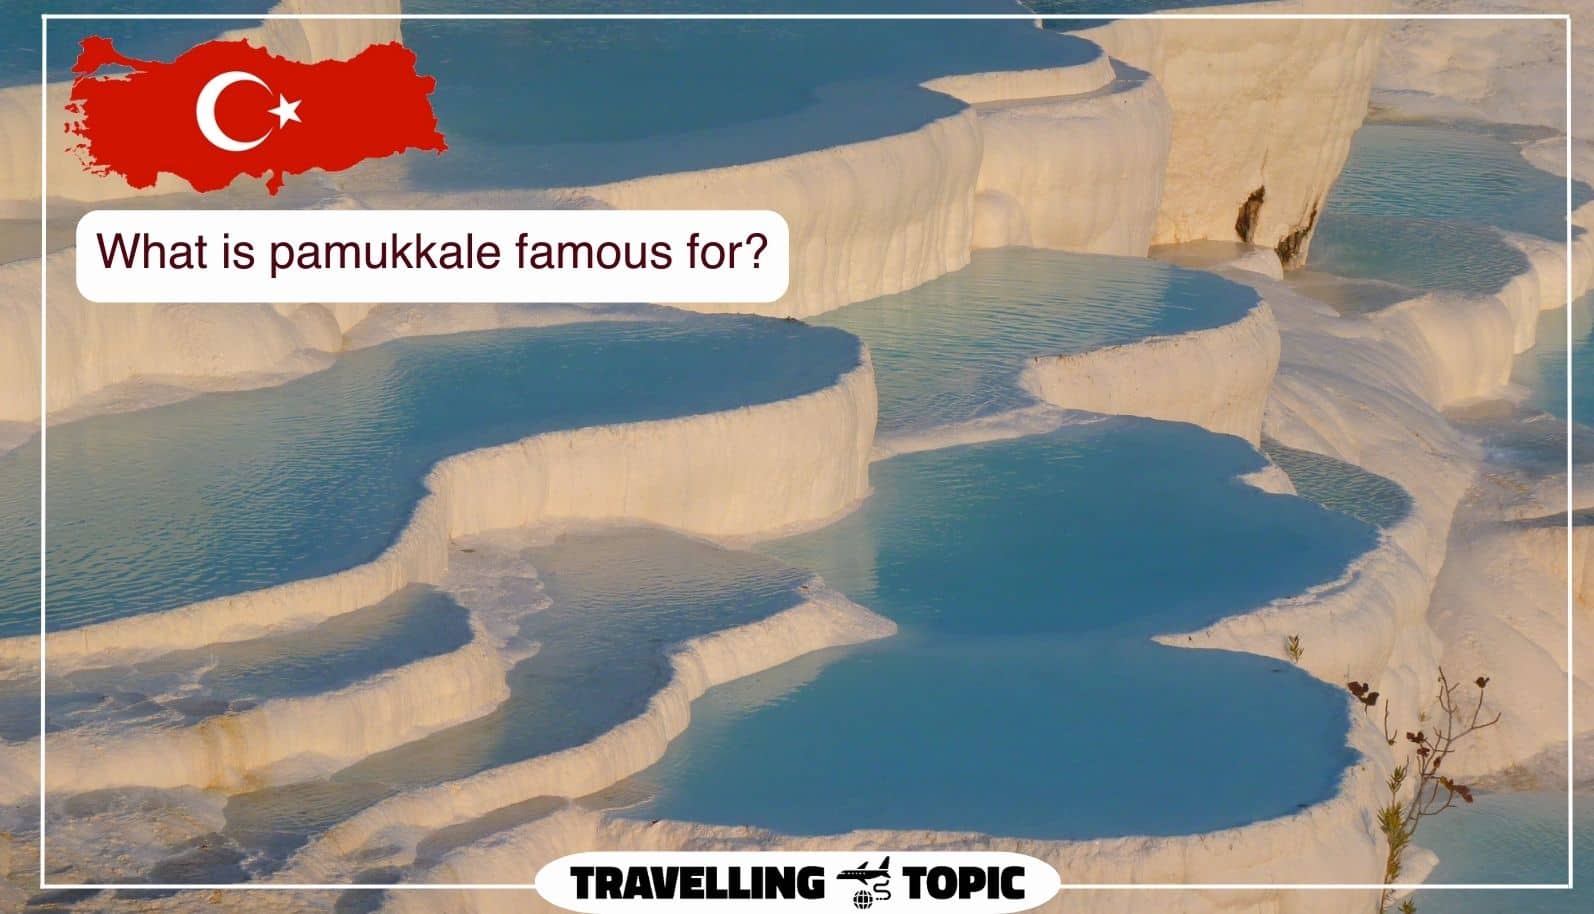 What is pamukkale famous for